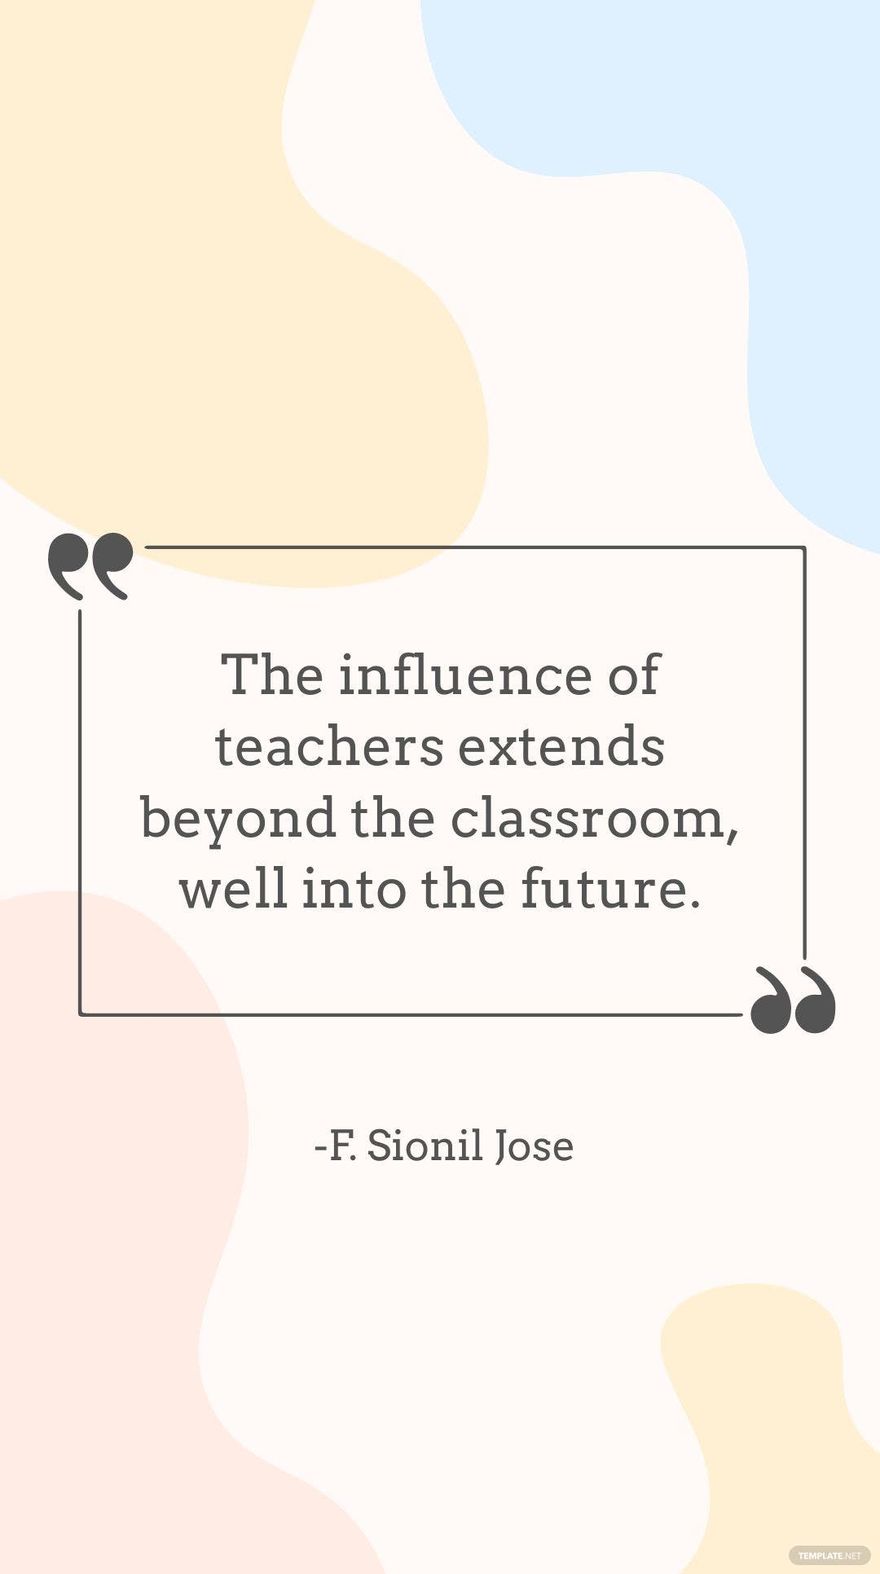 F. Sionil Jose - The influence of teachers extends beyond the classroom, well into the future.